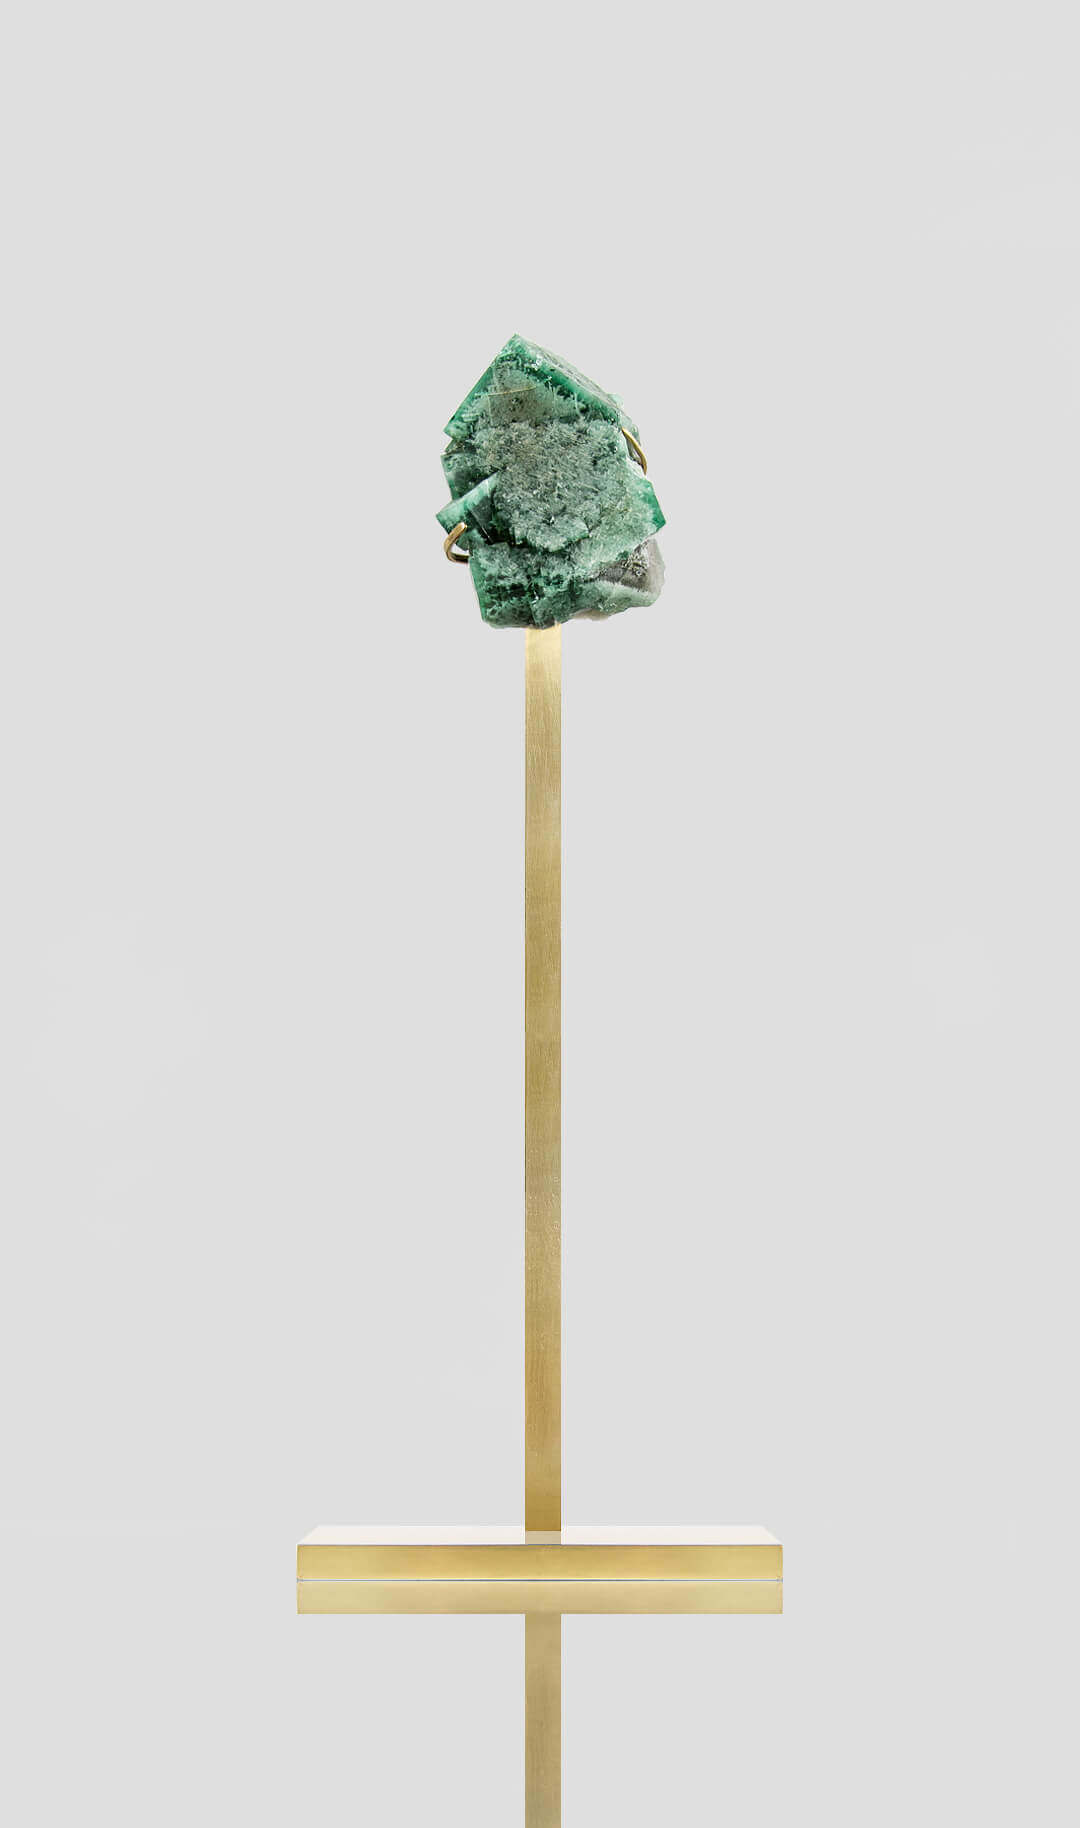 stunning green British fluorite for sale on the fossil store custom brass stand 52